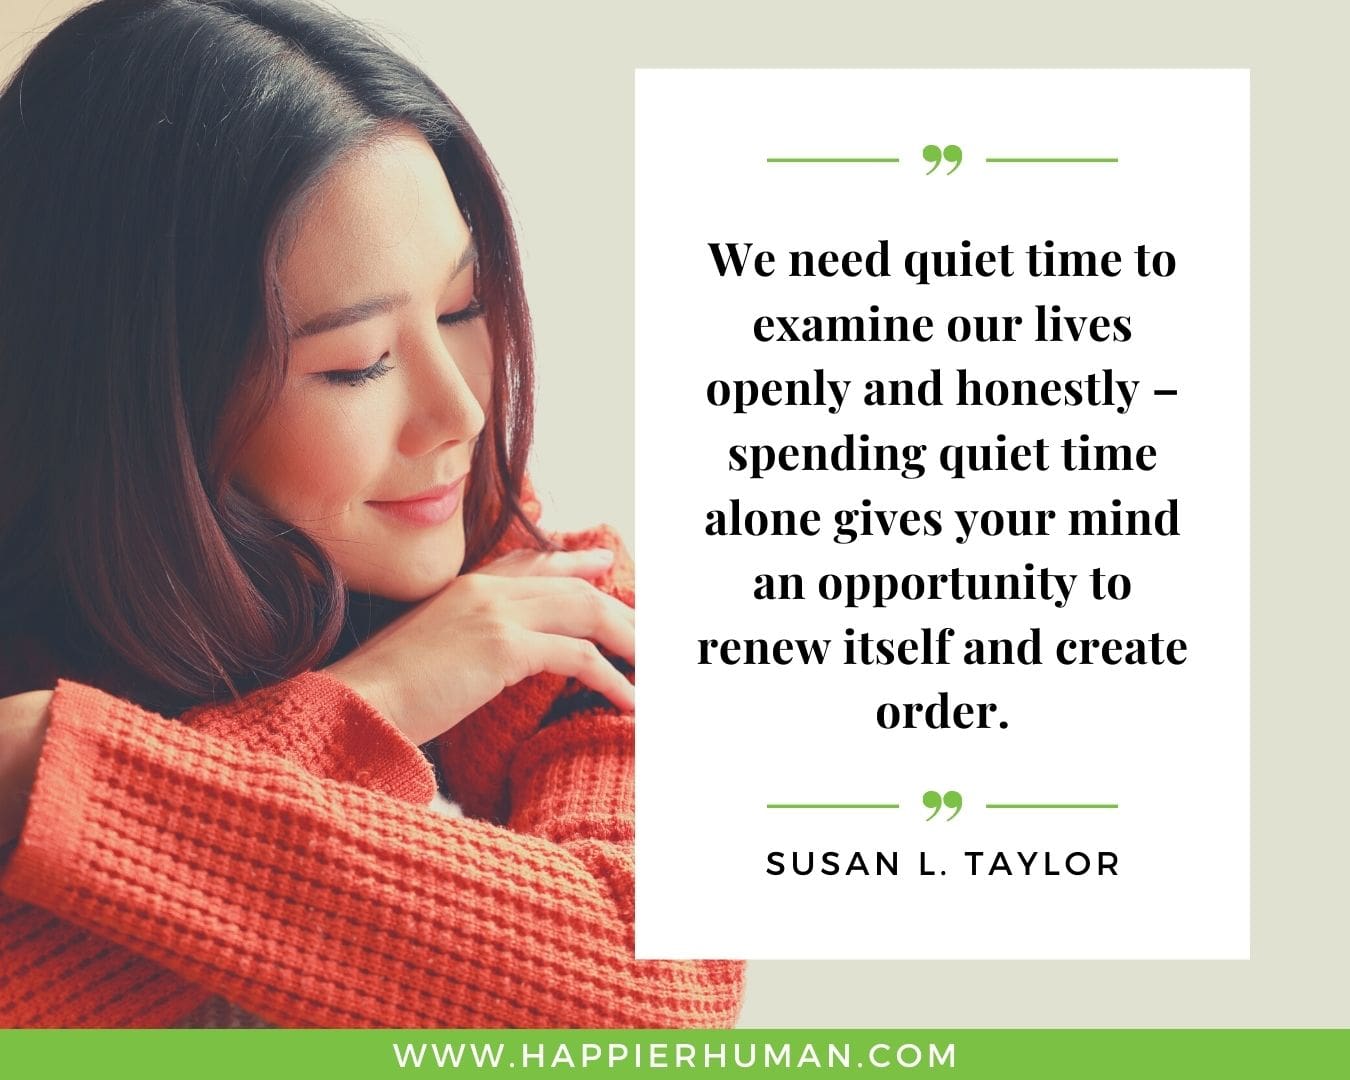 Loneliness Quotes - “We need quiet time to examine our lives openly and honestly – spending quiet time alone gives your mind an opportunity to renew itself and create order.”– Susan L. Taylor